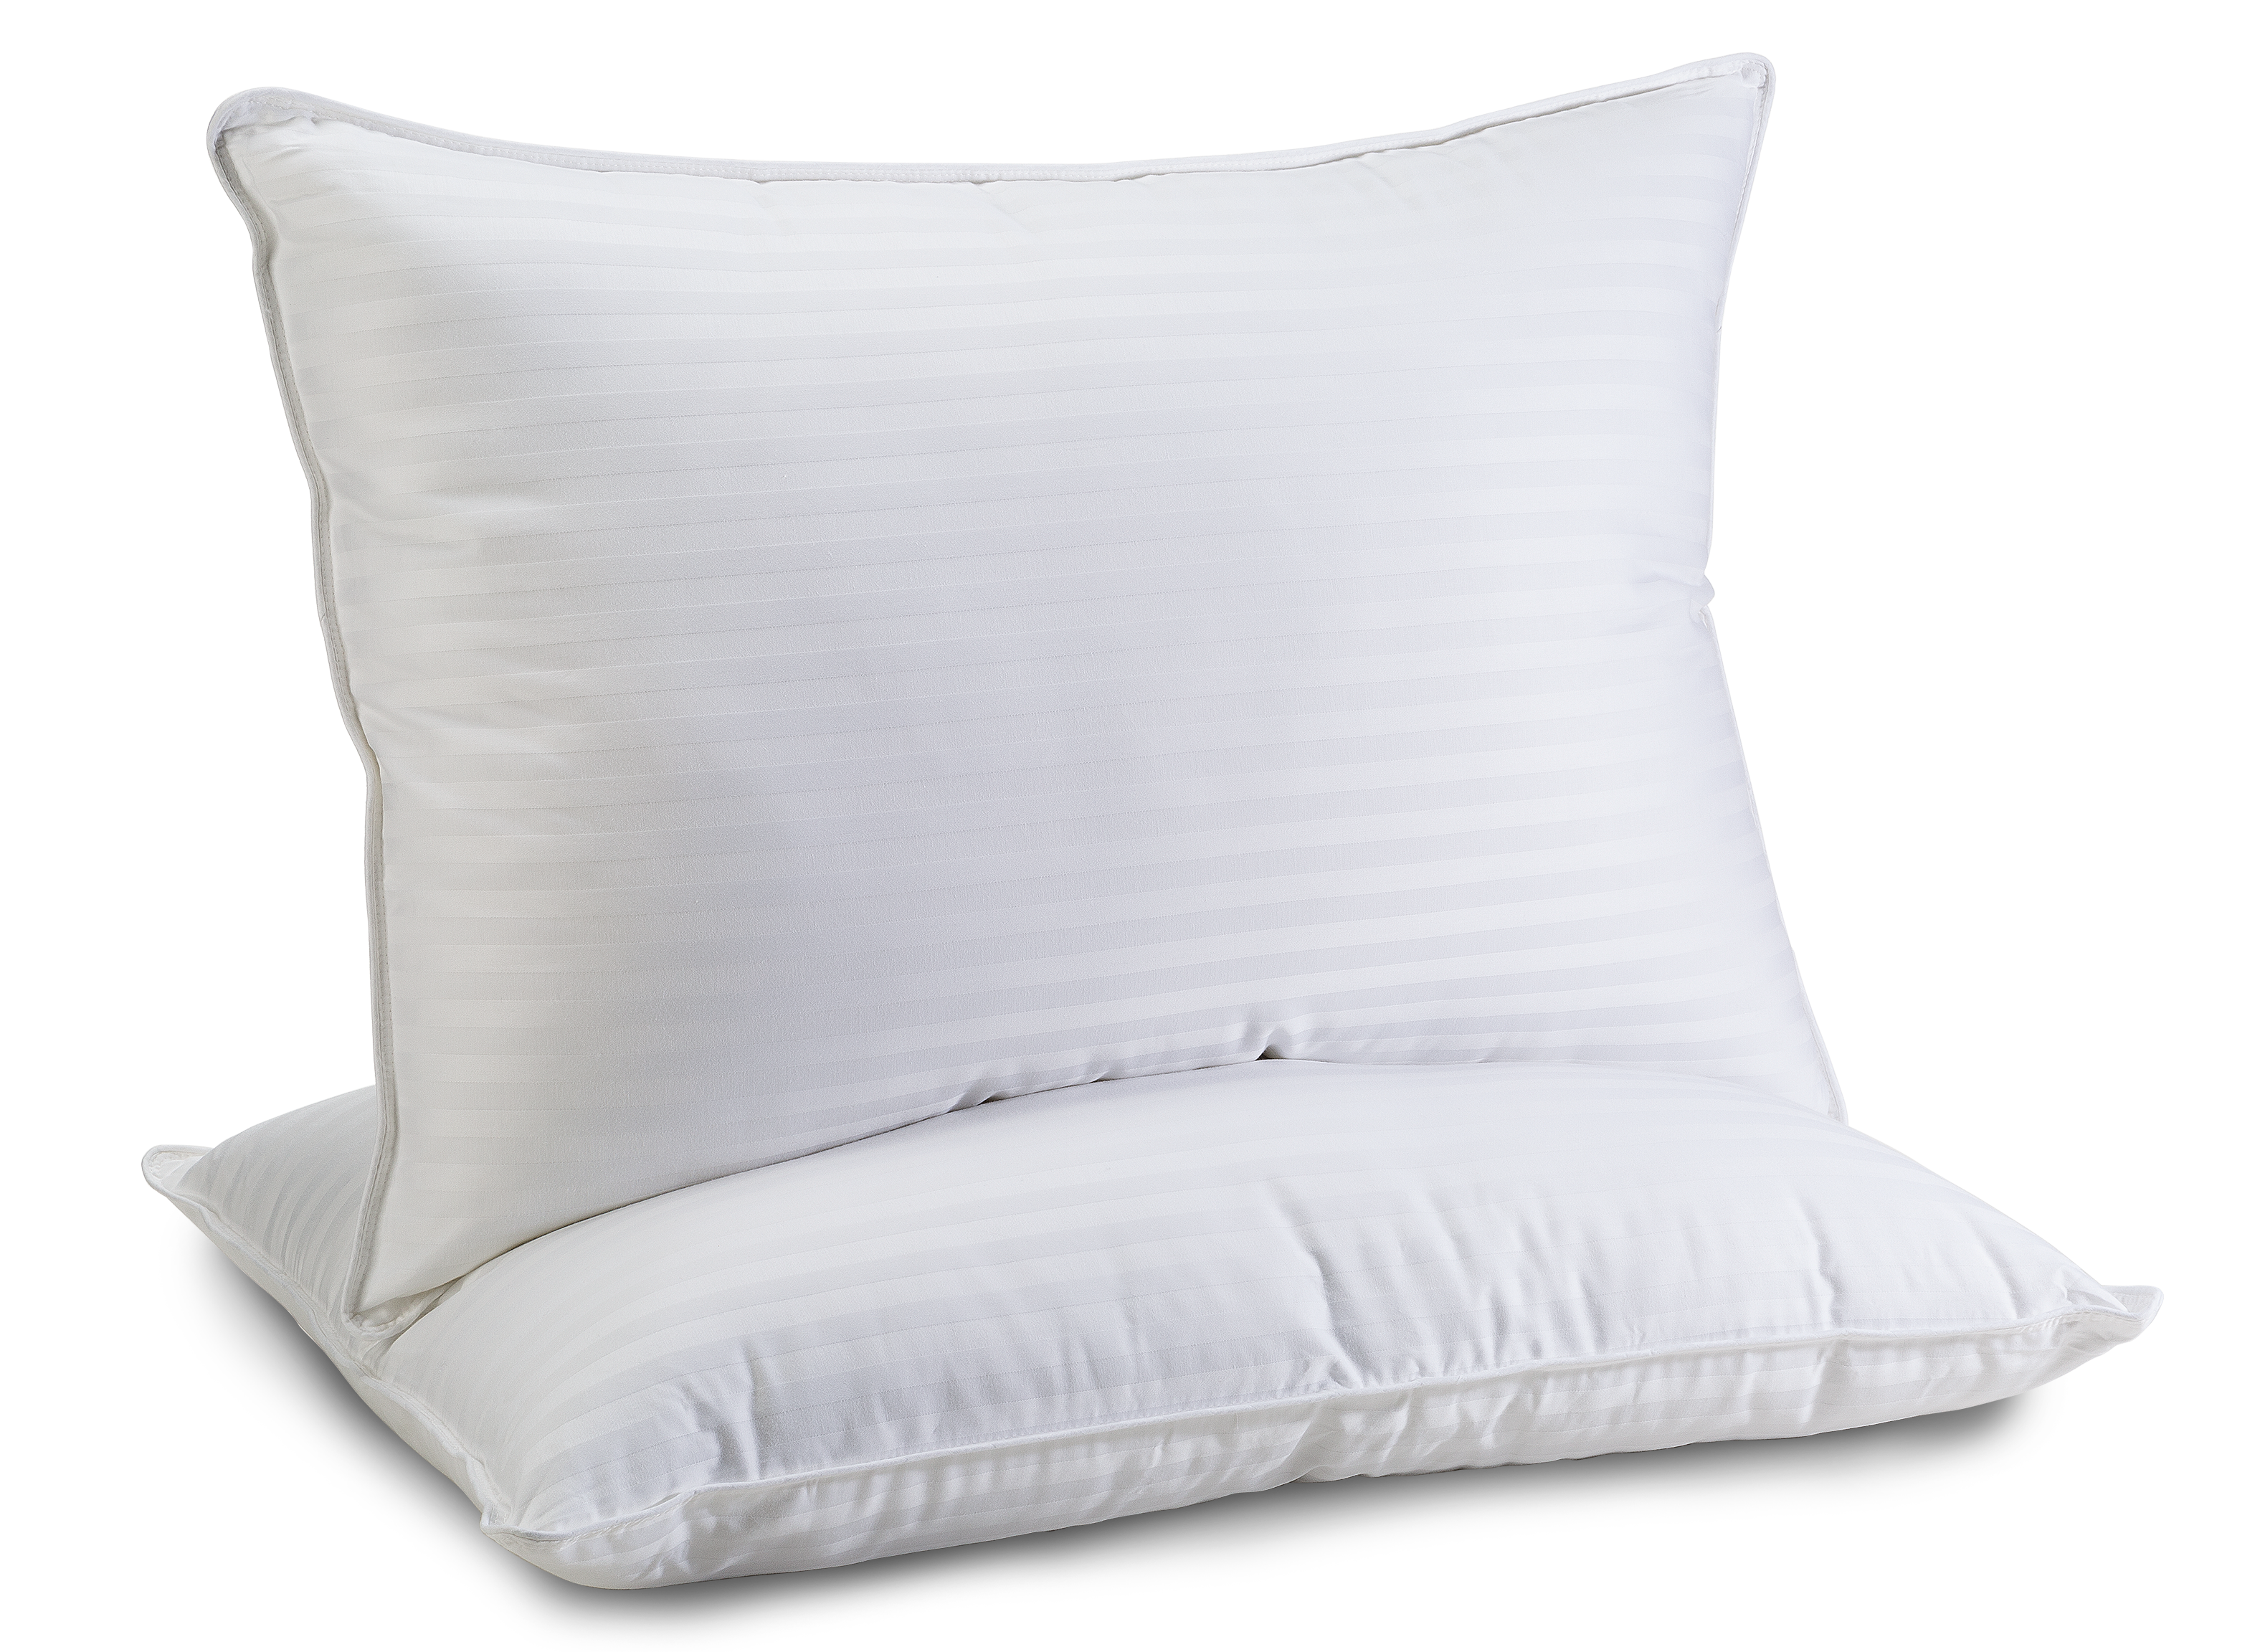 Review: I Tried the Beckham Hotel Collection Pillows from